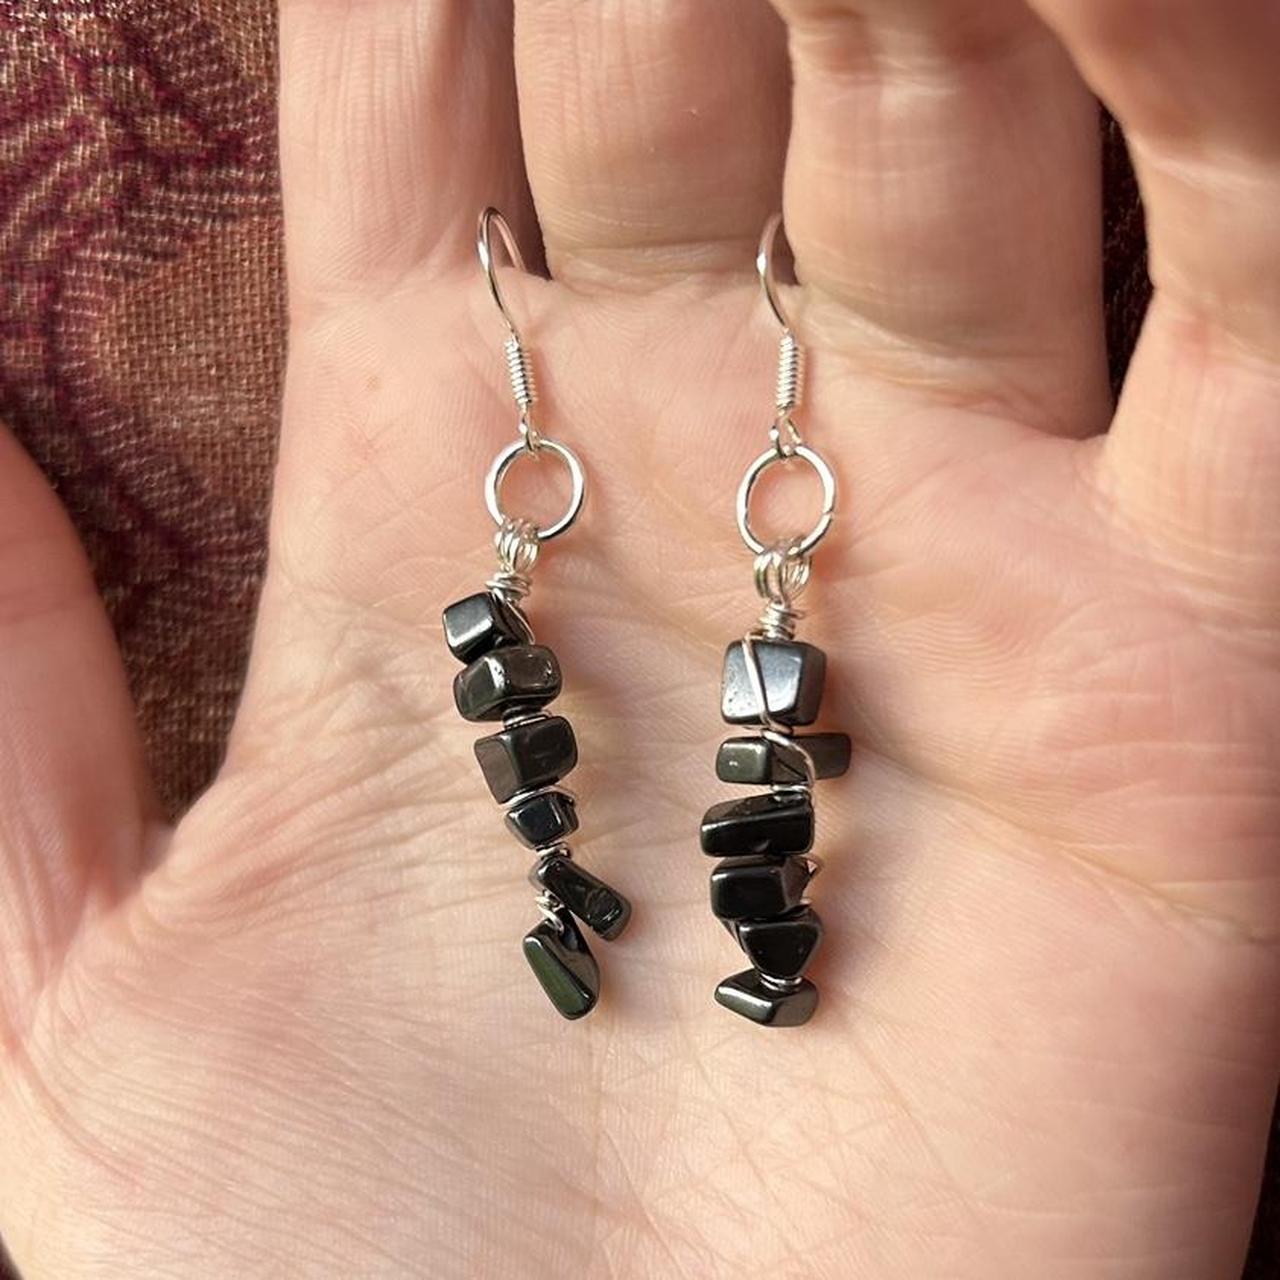 Women's Black and Silver Jewellery